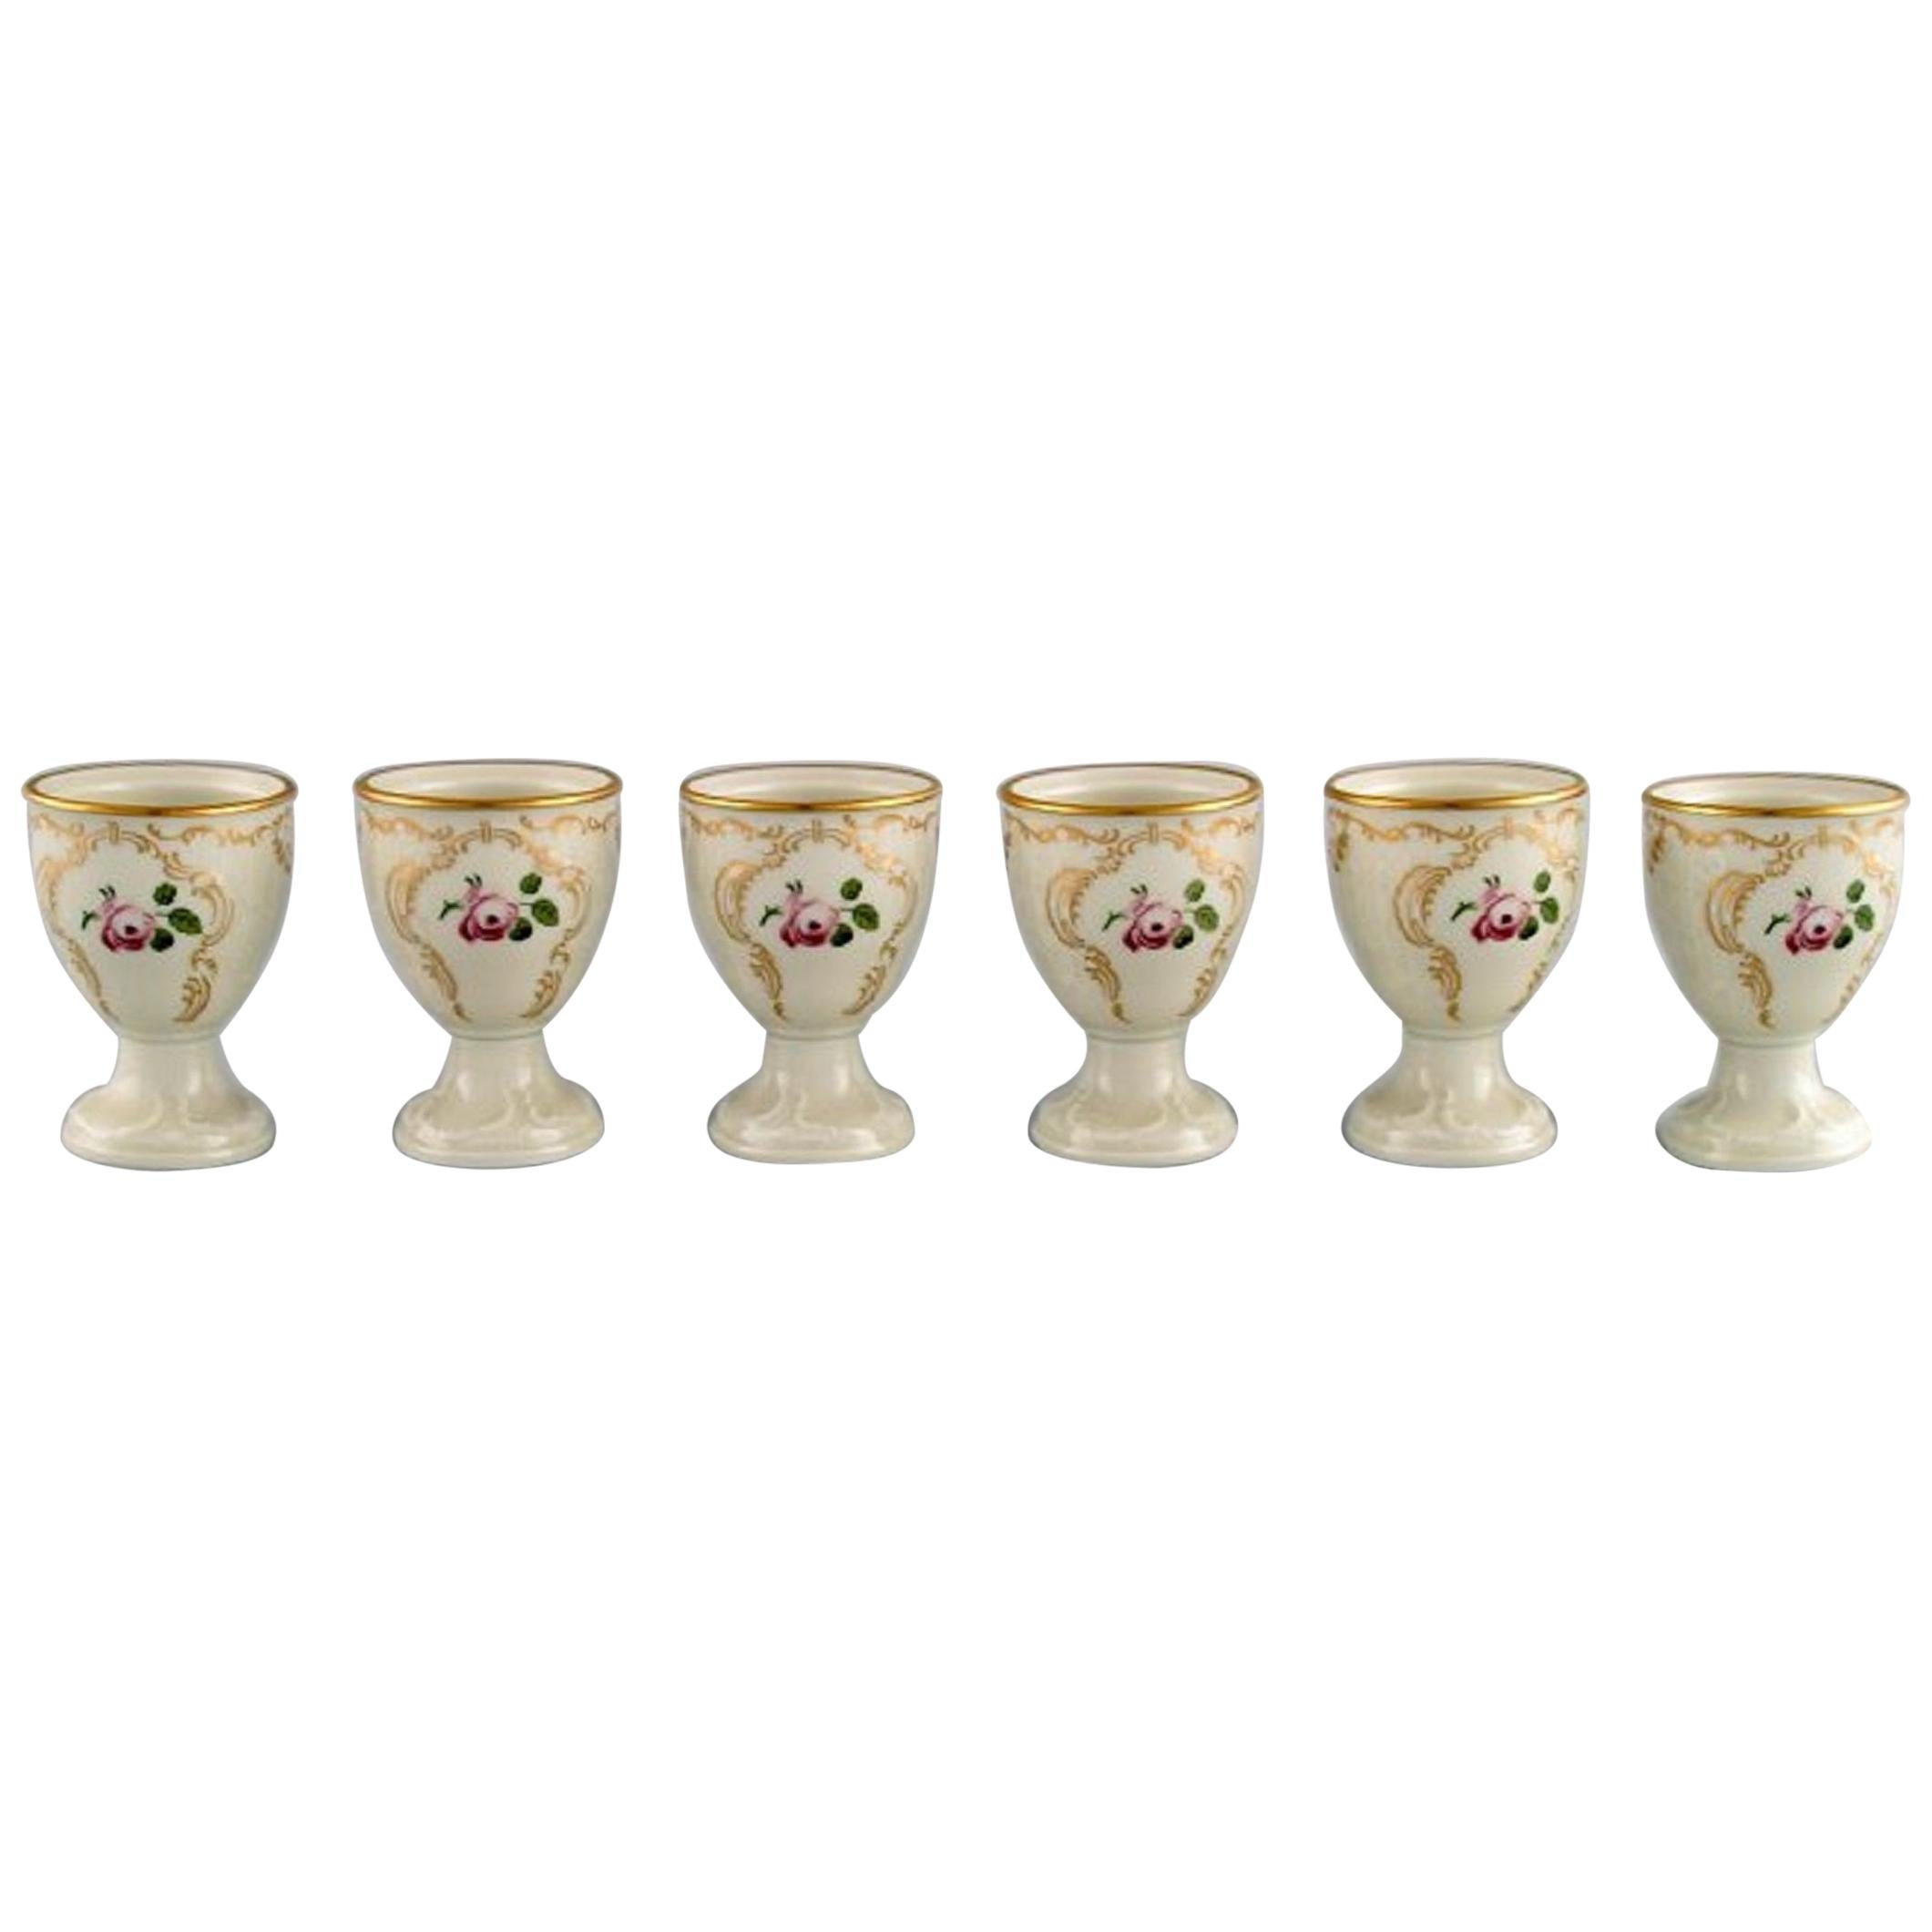 Six Rosenthal Classic Rose Egg Cups in Hand Painted Porcelain, Mid-20th Century